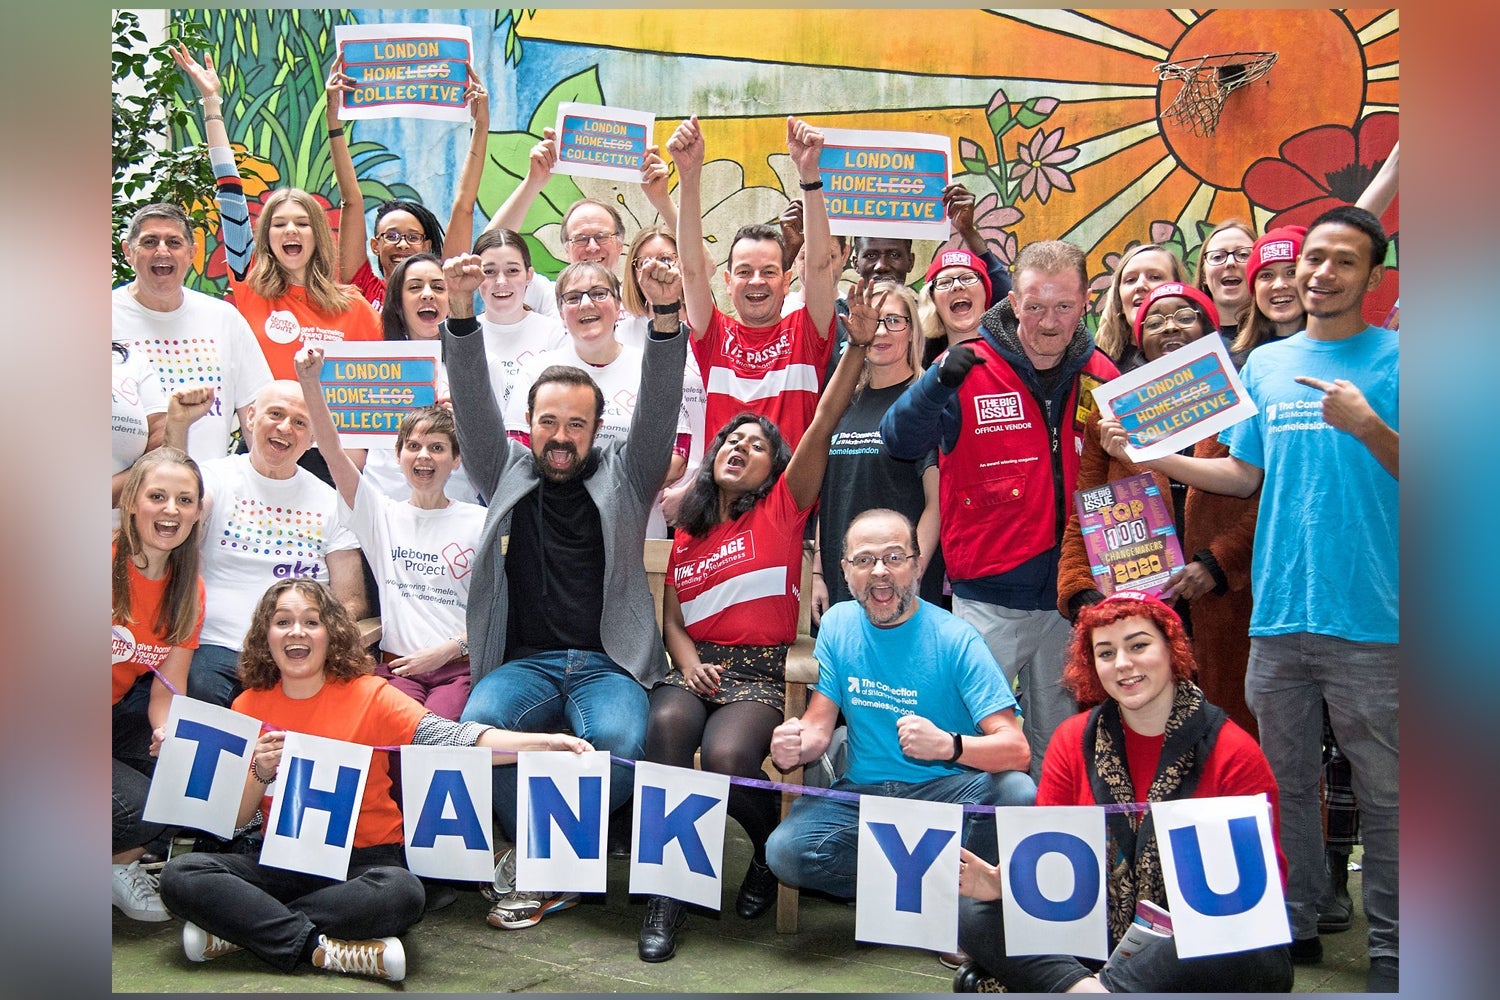 Celebration: the London Homeless Collective and Evening Standard proprietor Evgeny Lebedev say thank you